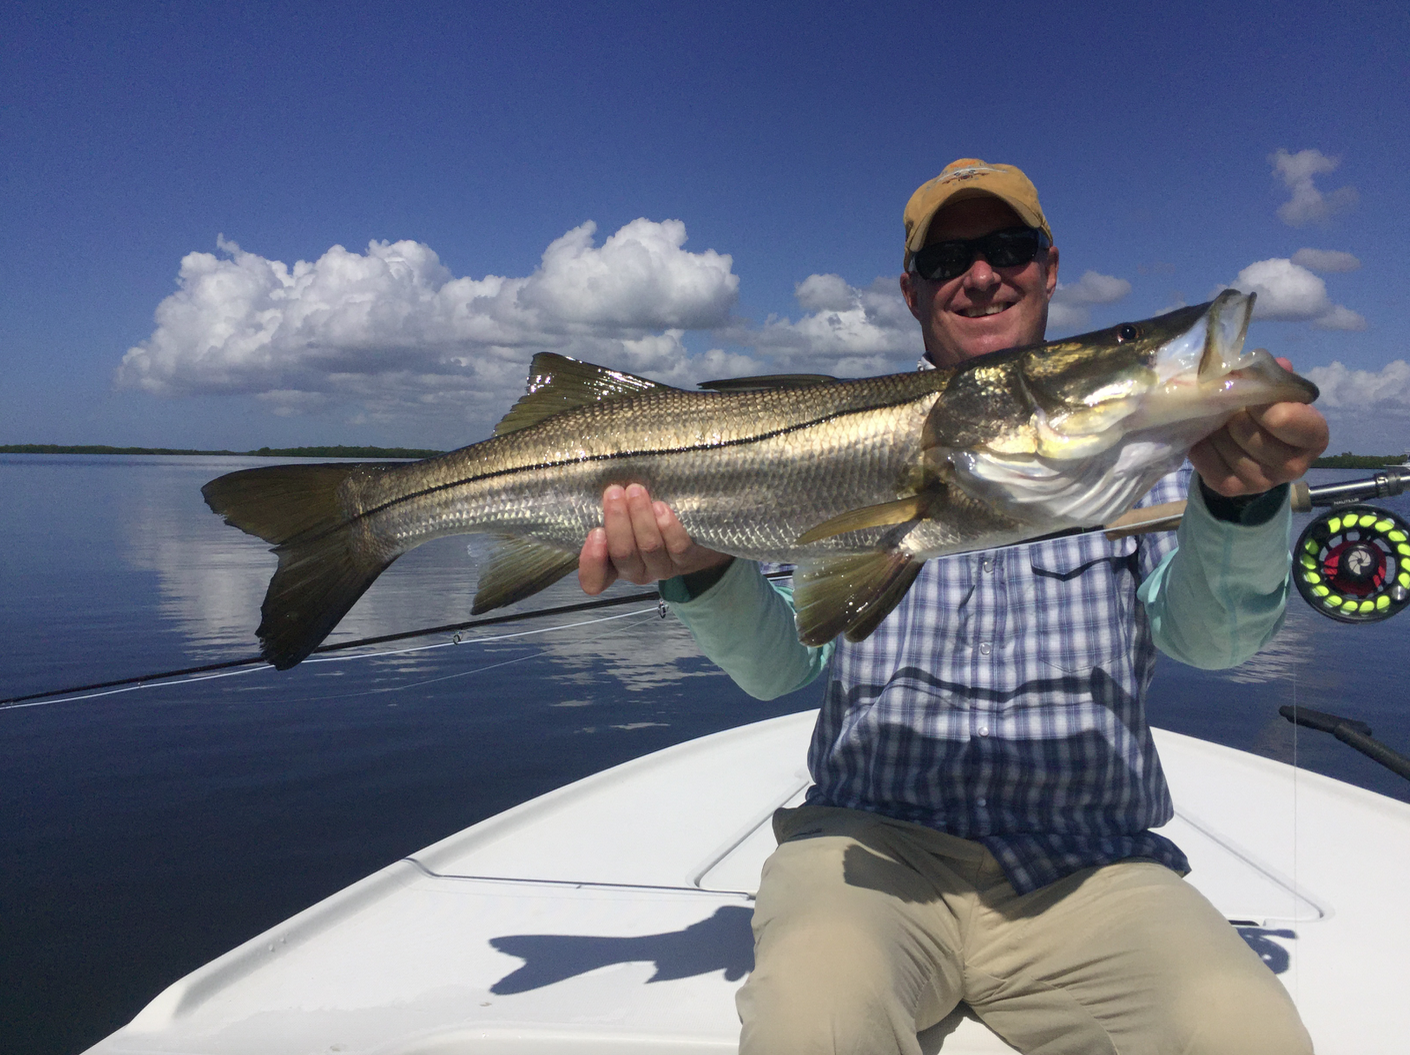 https://bocaguideservices.com/wp-content/uploads/snook-fly-fishing-report.png